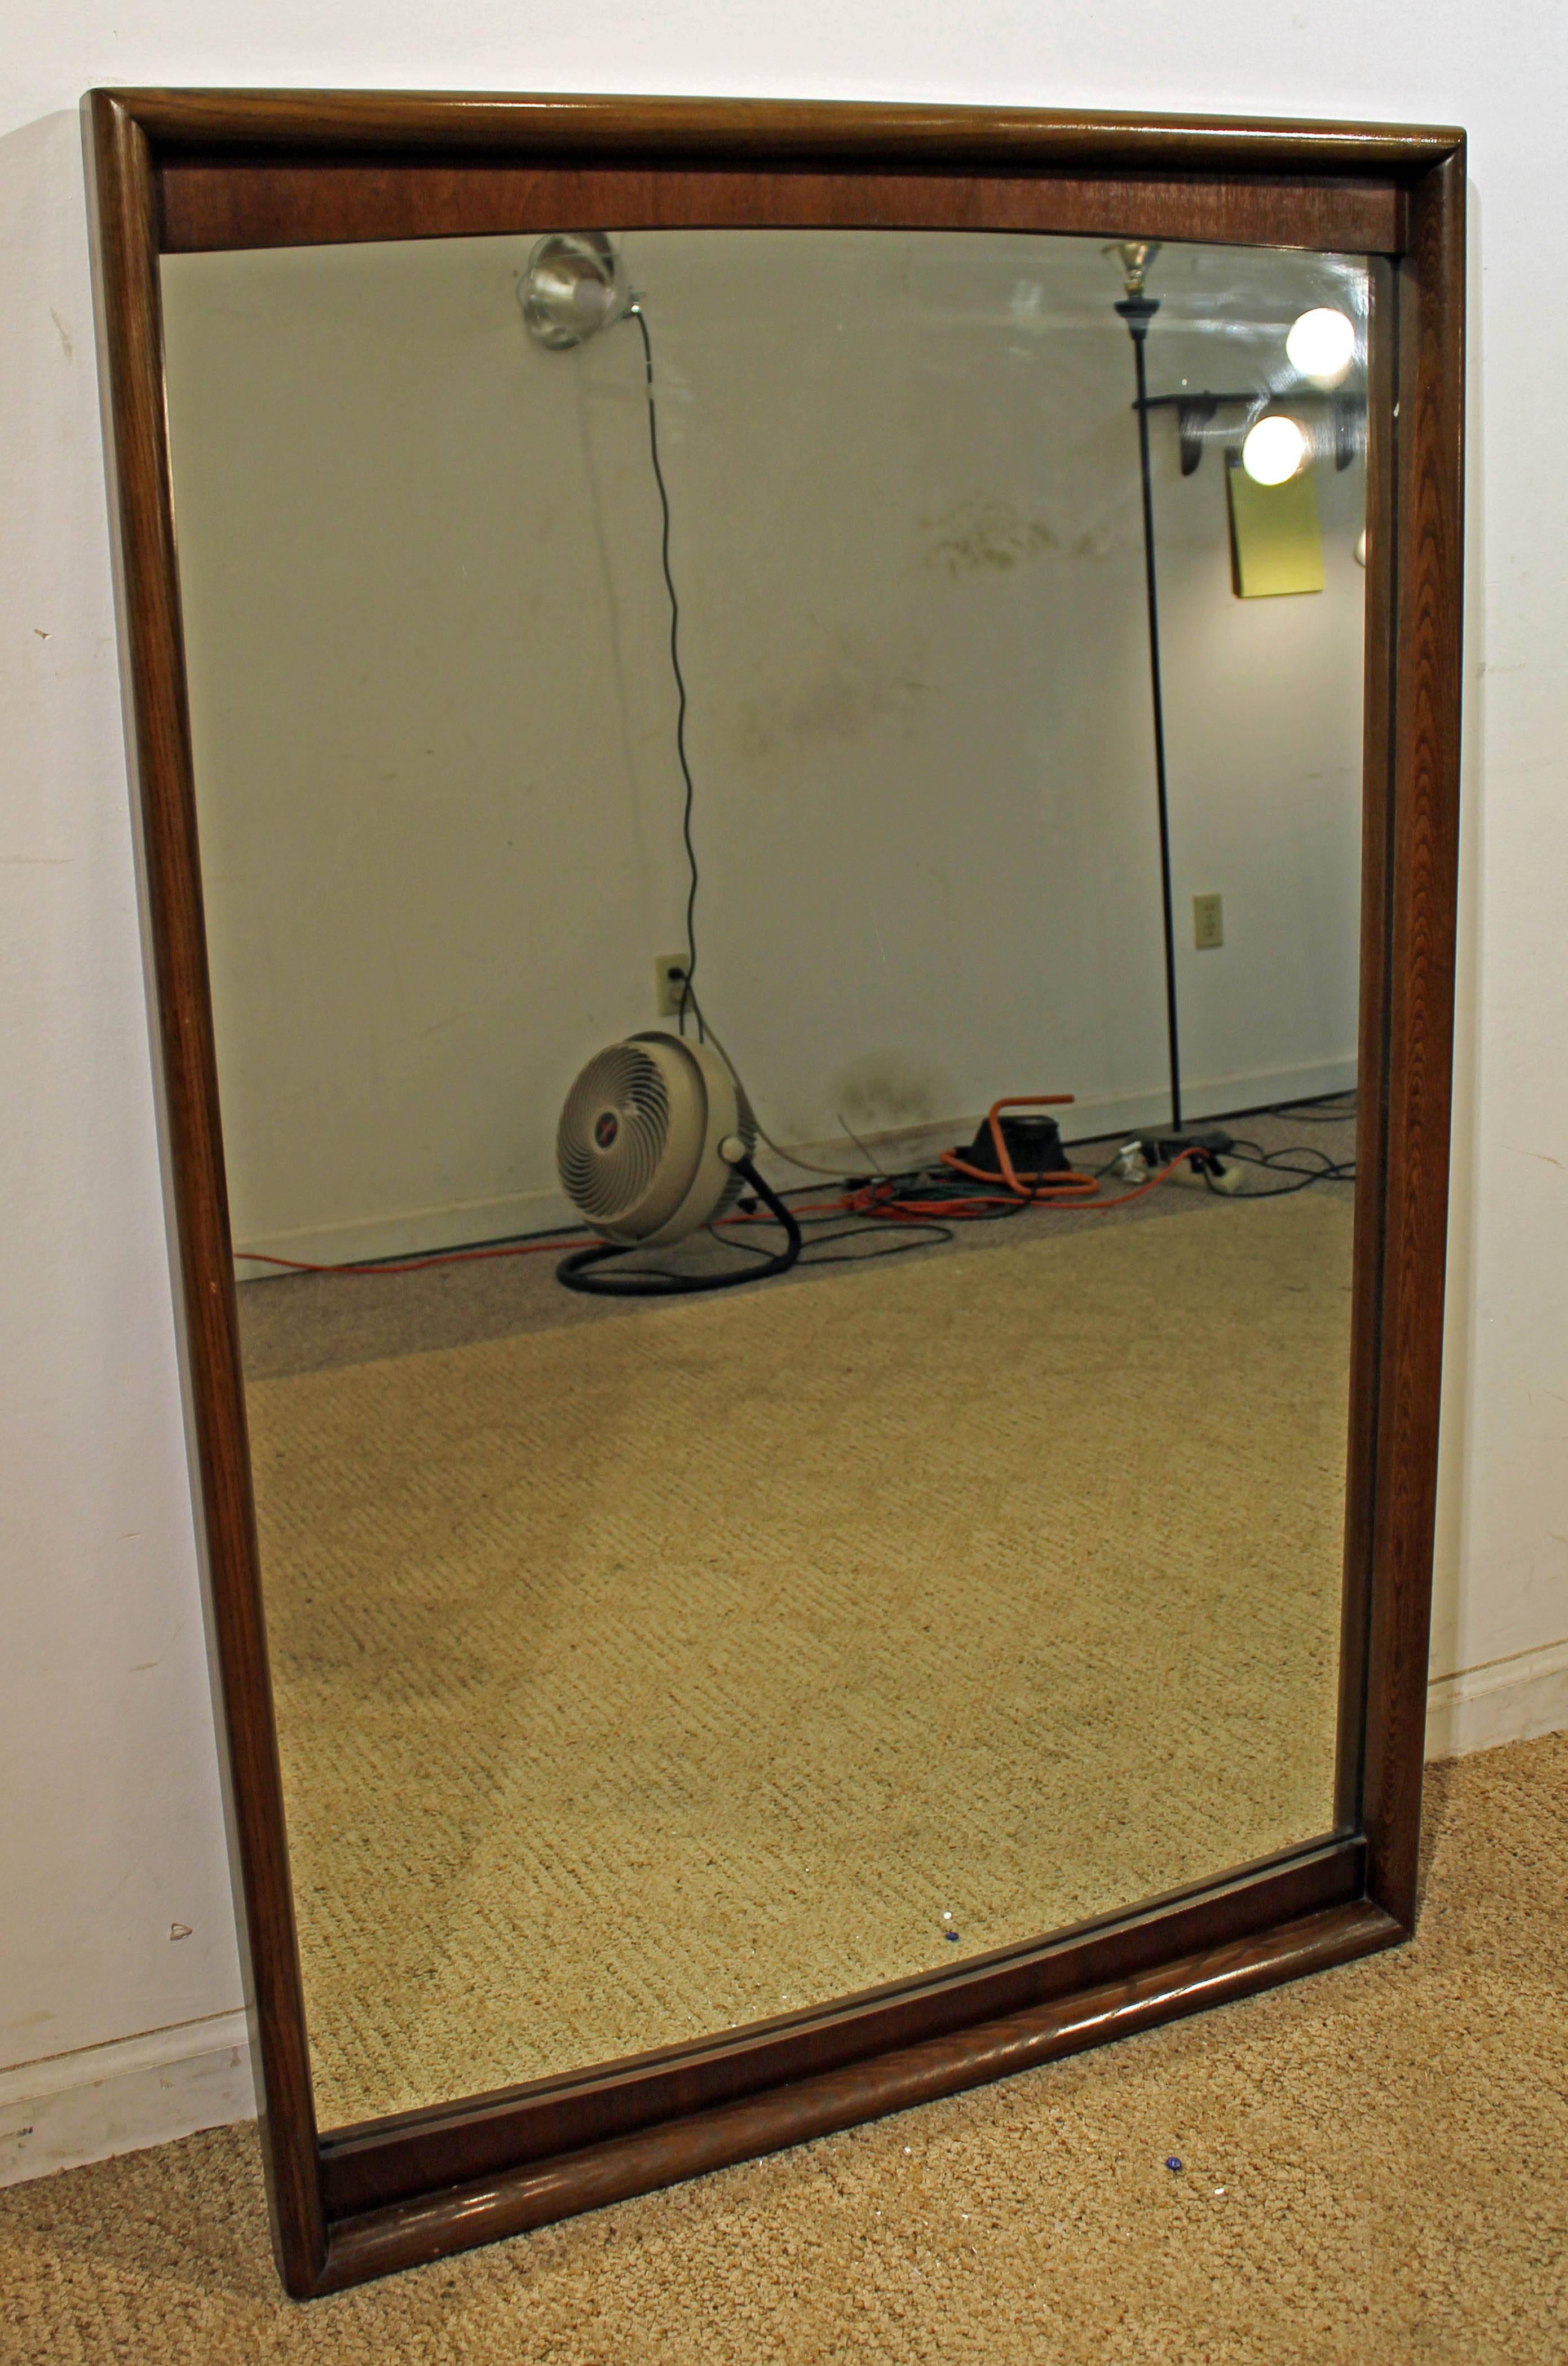 Offered is a Mid-Century Modern wall mirror made by United Furniture. Features a walnut frame. It is in excellent condition for its age.

Dimensions: 34